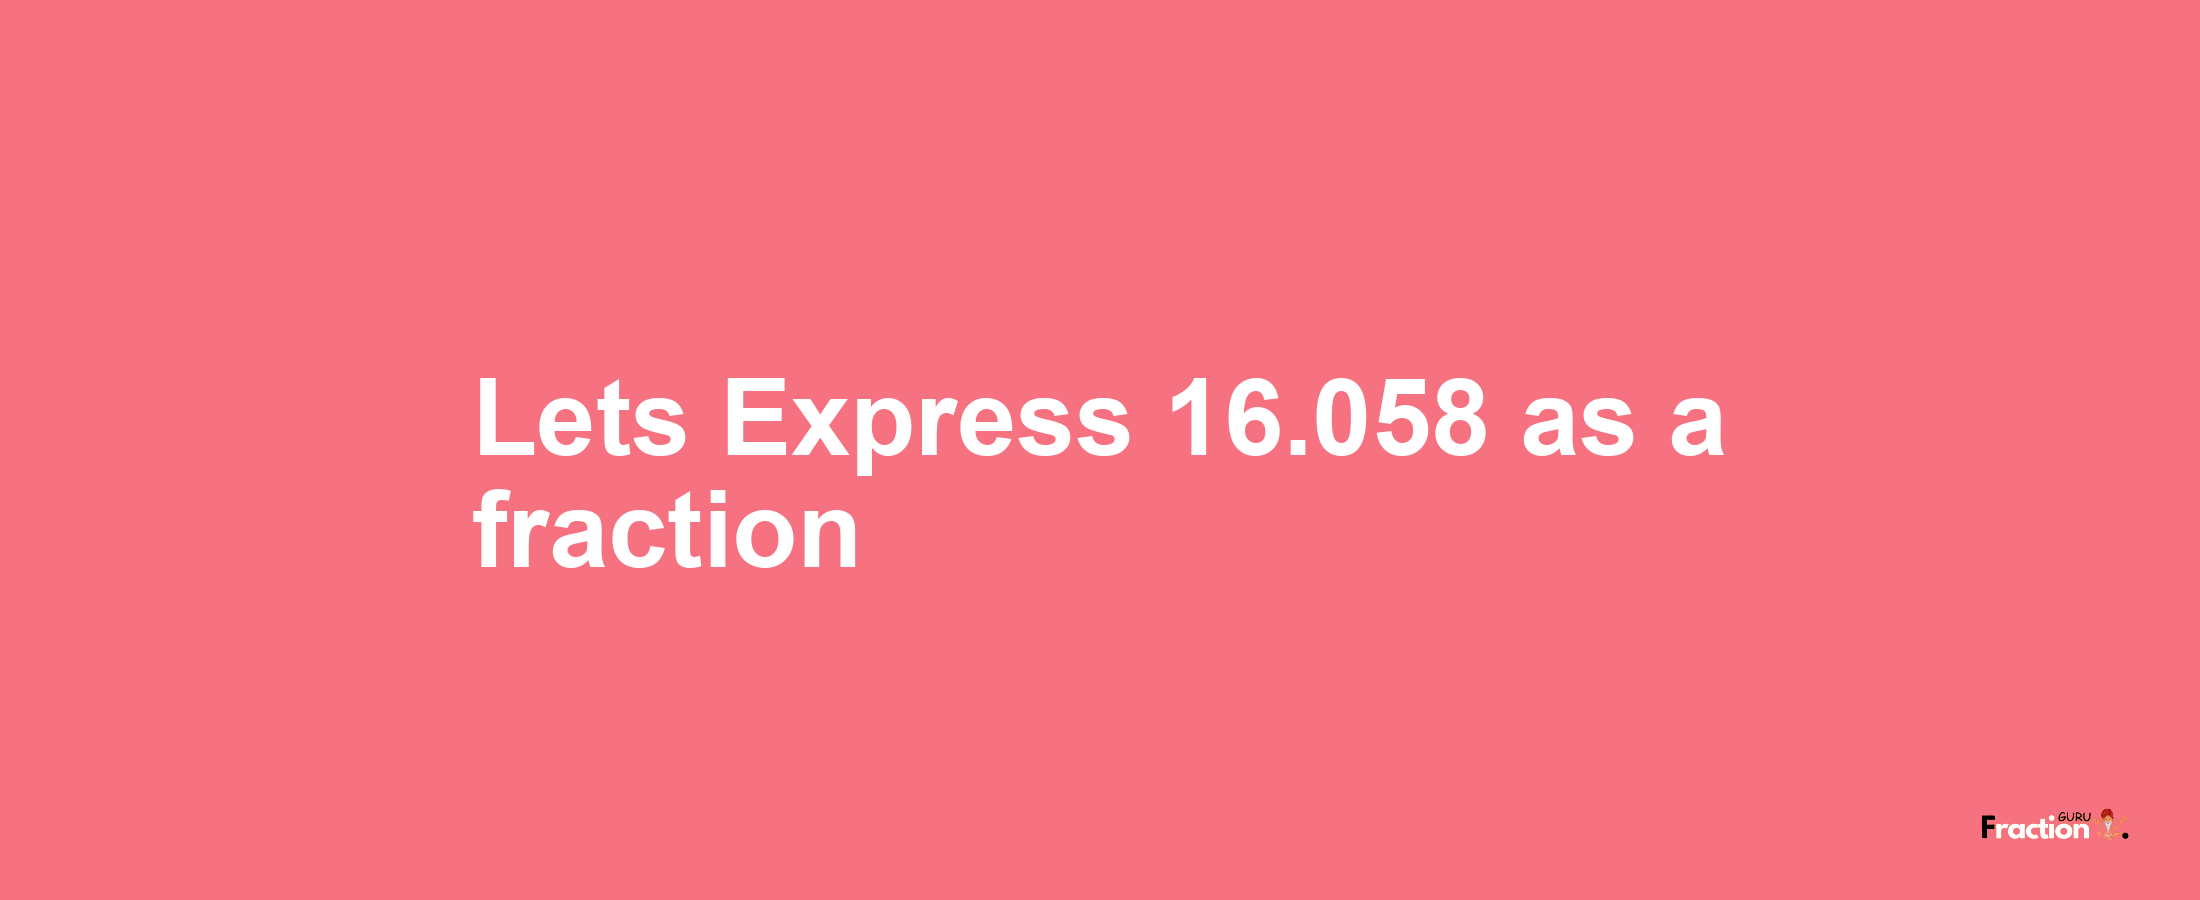 Lets Express 16.058 as afraction